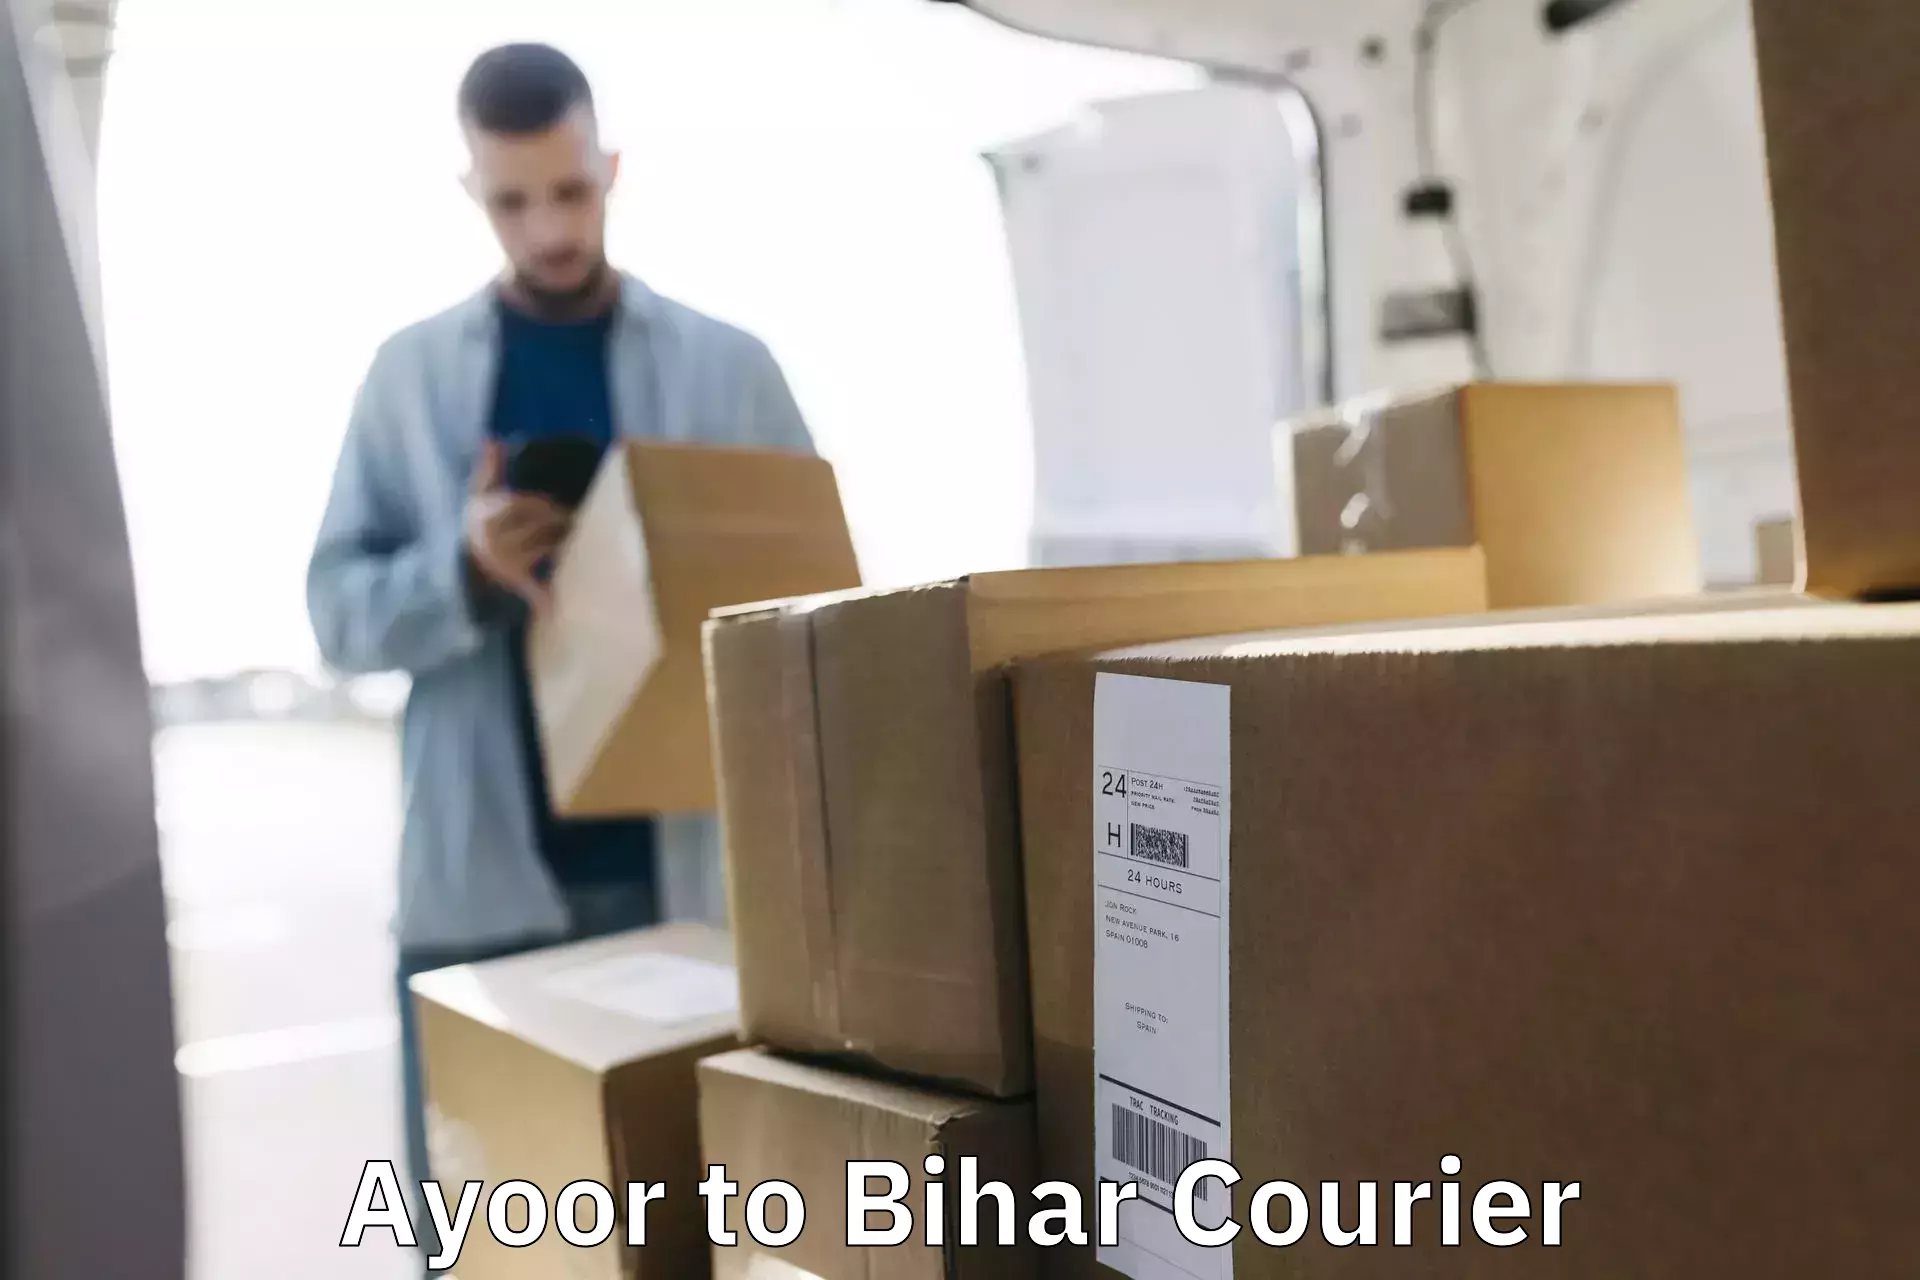 Affordable parcel service Ayoor to Forbesganj